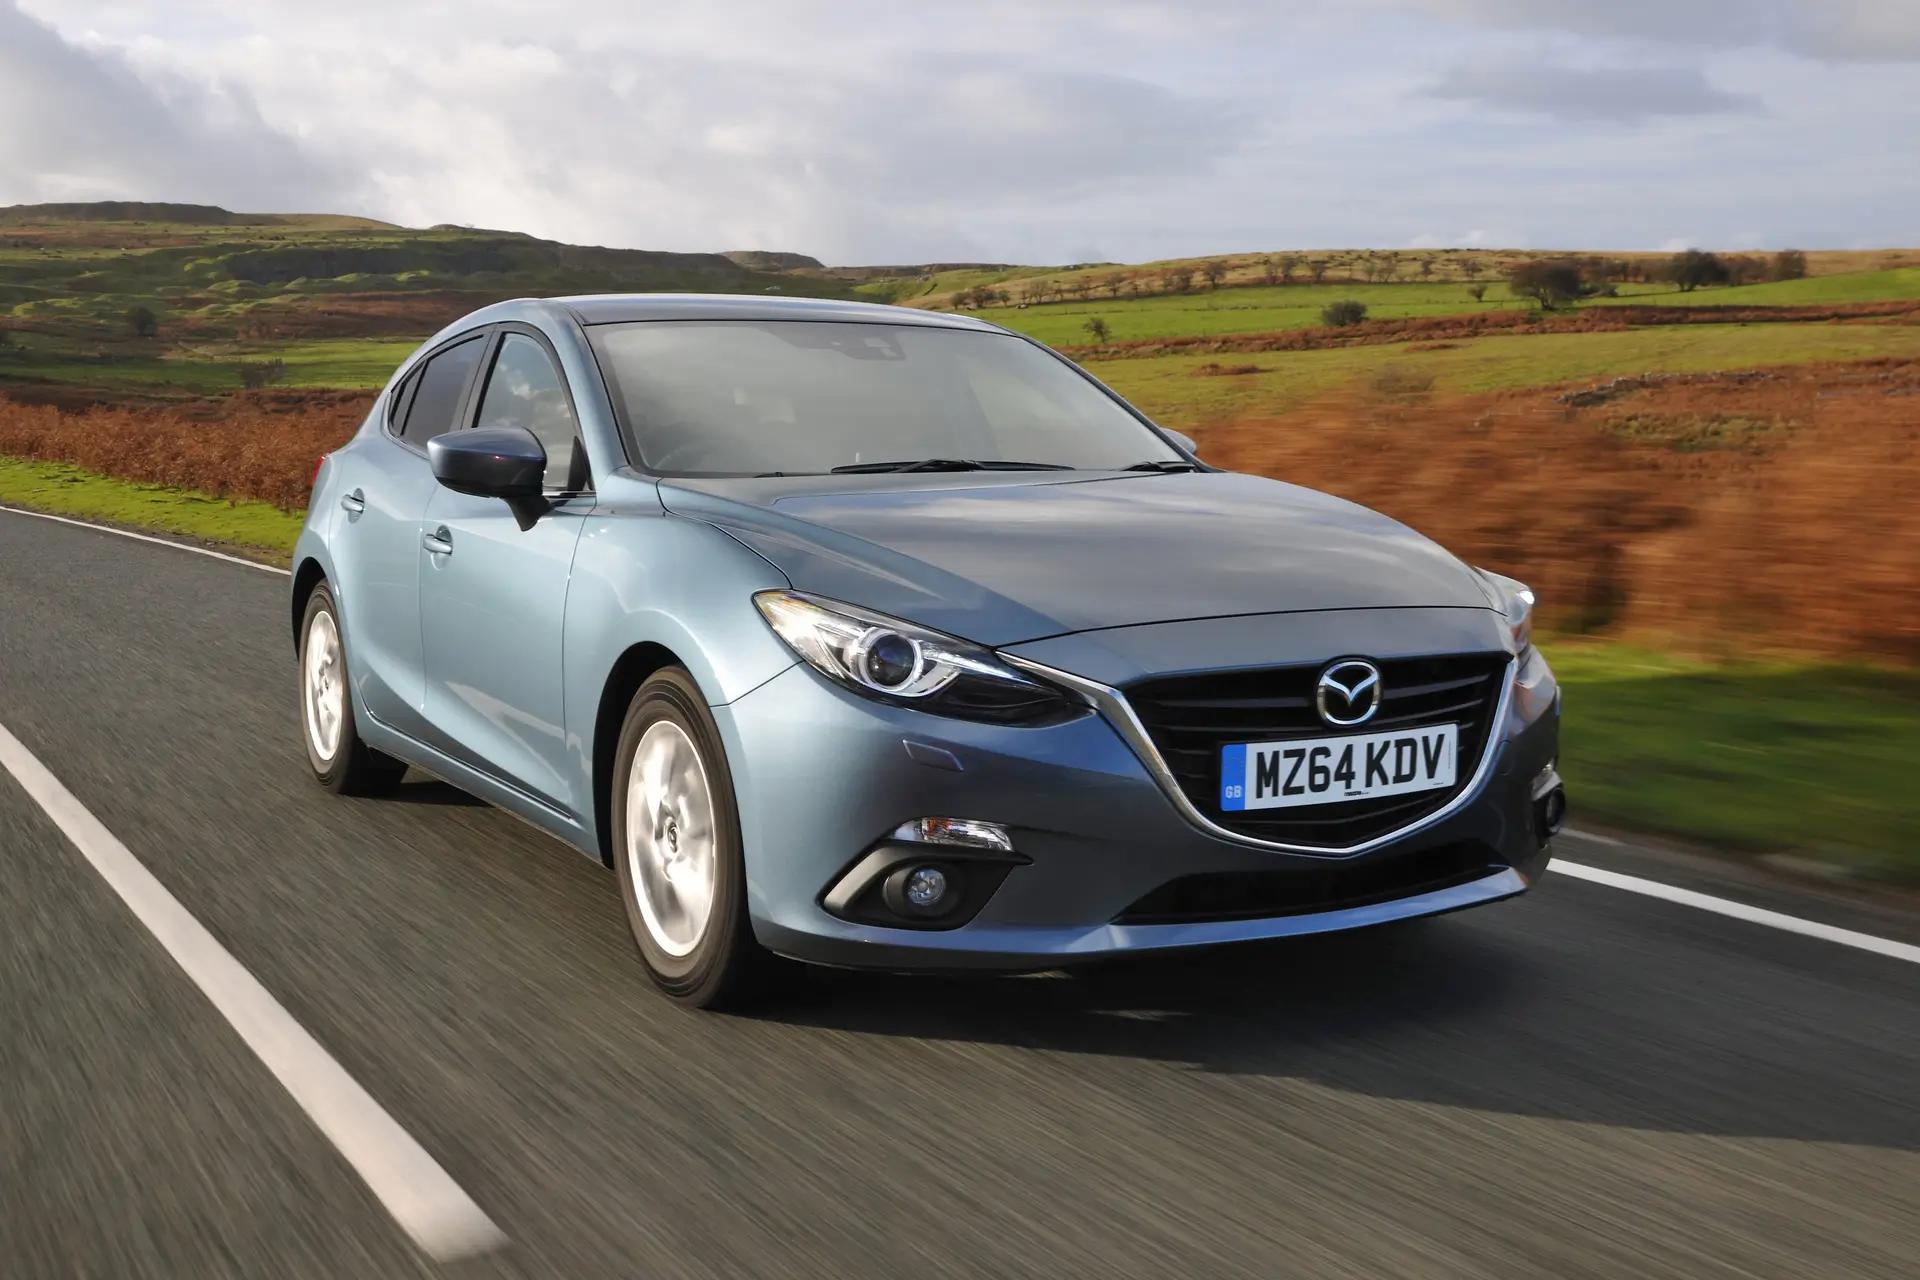 Mazda 3 (2014-2019) Review: exterior front three quarter photo of the Mazda 3 on the road